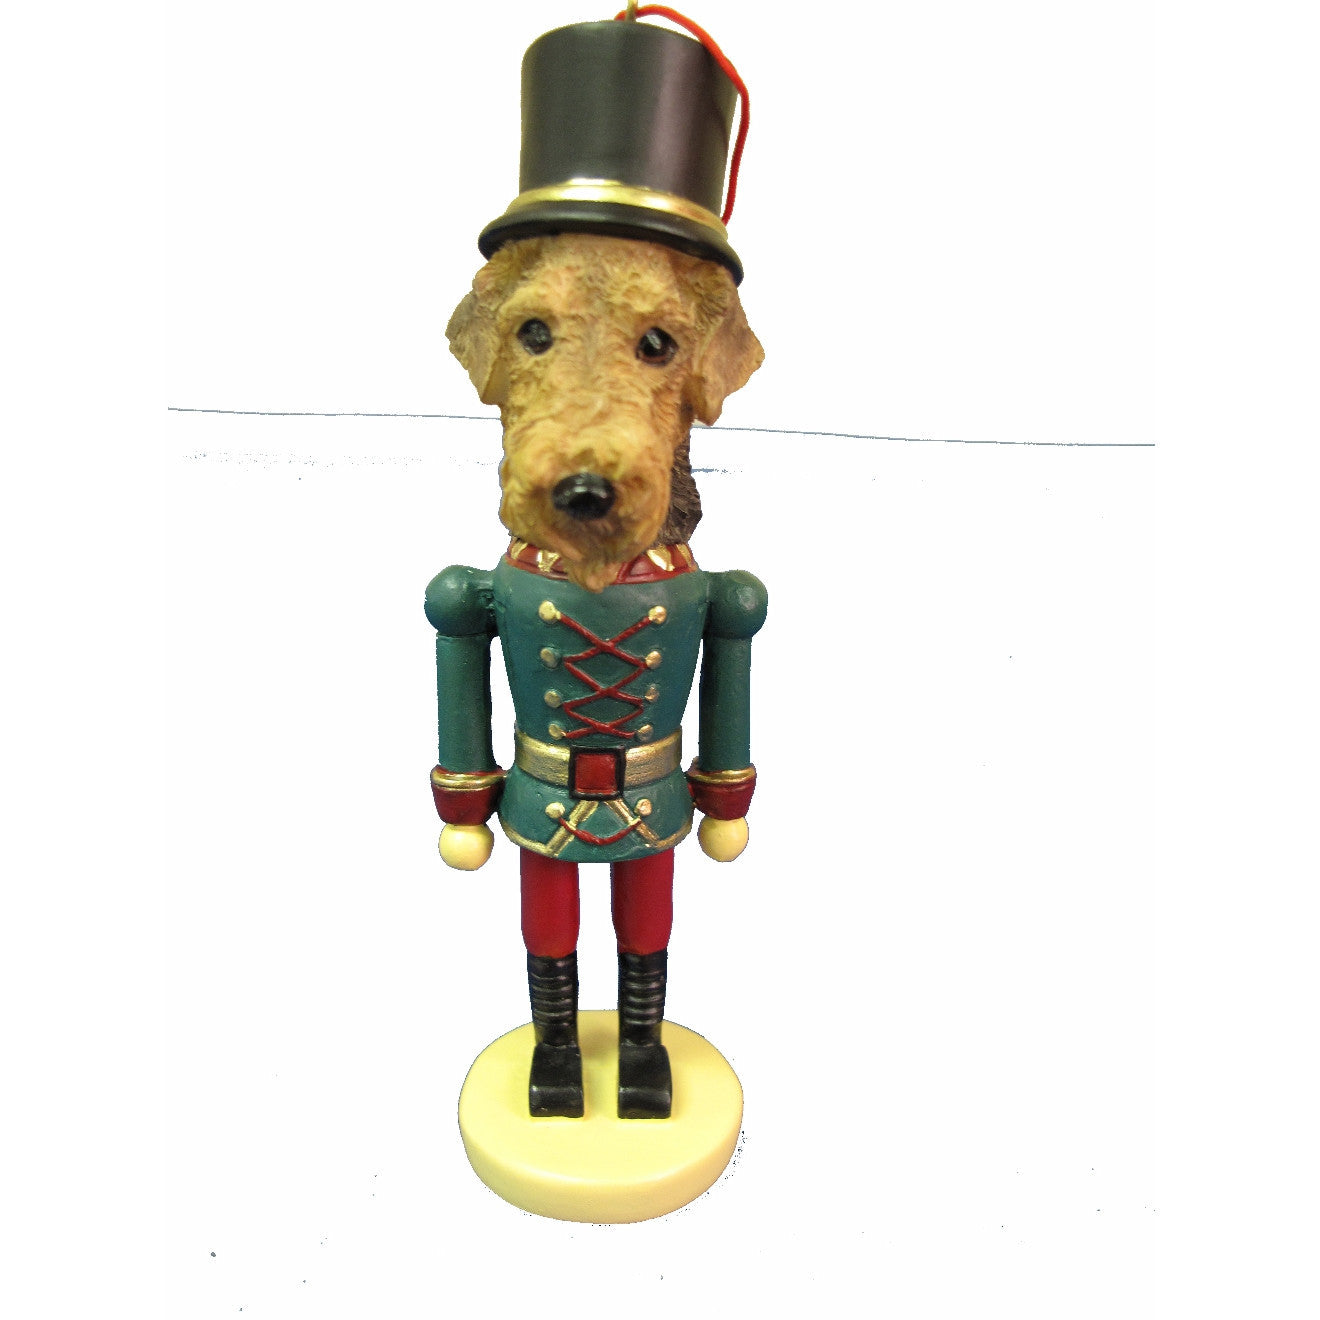 Airedale Terrier Dog Toy Soldier Nutcracker Christmas Ornament